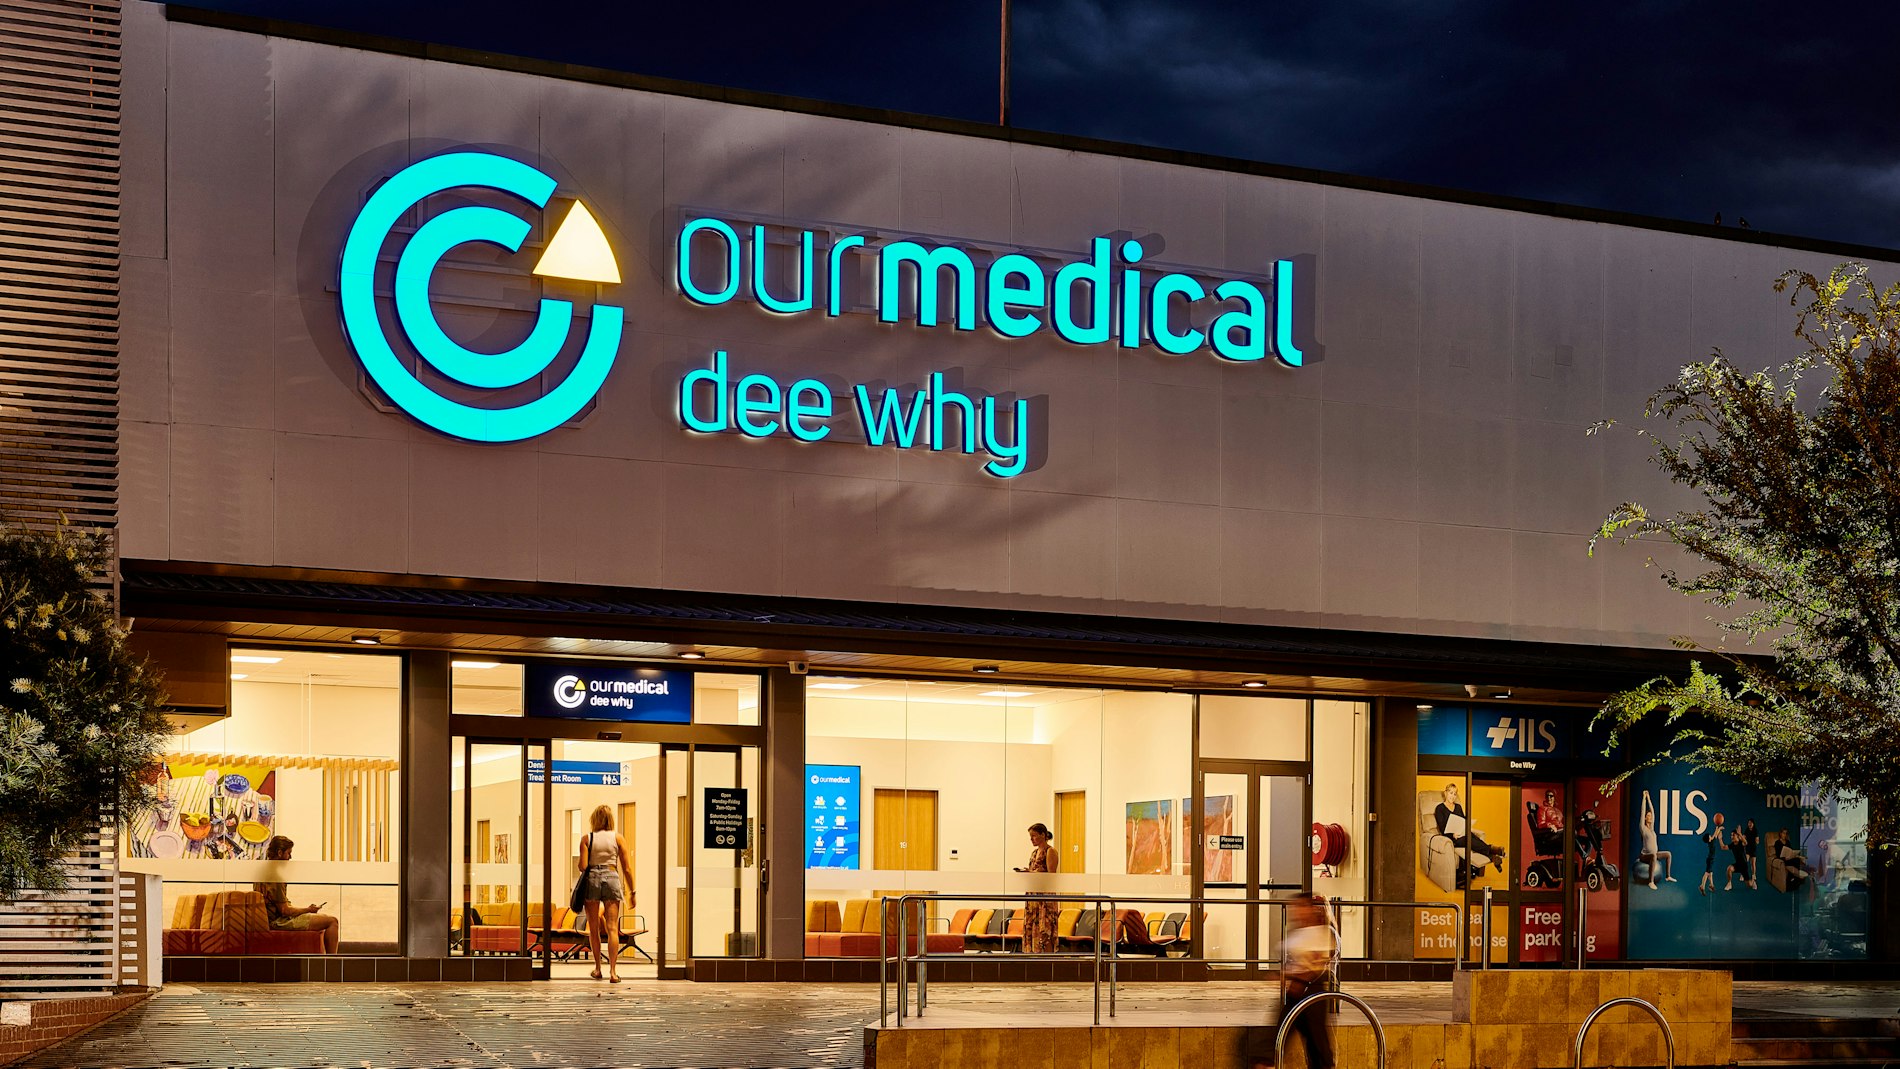 Our Medical Dee Why_Exterior